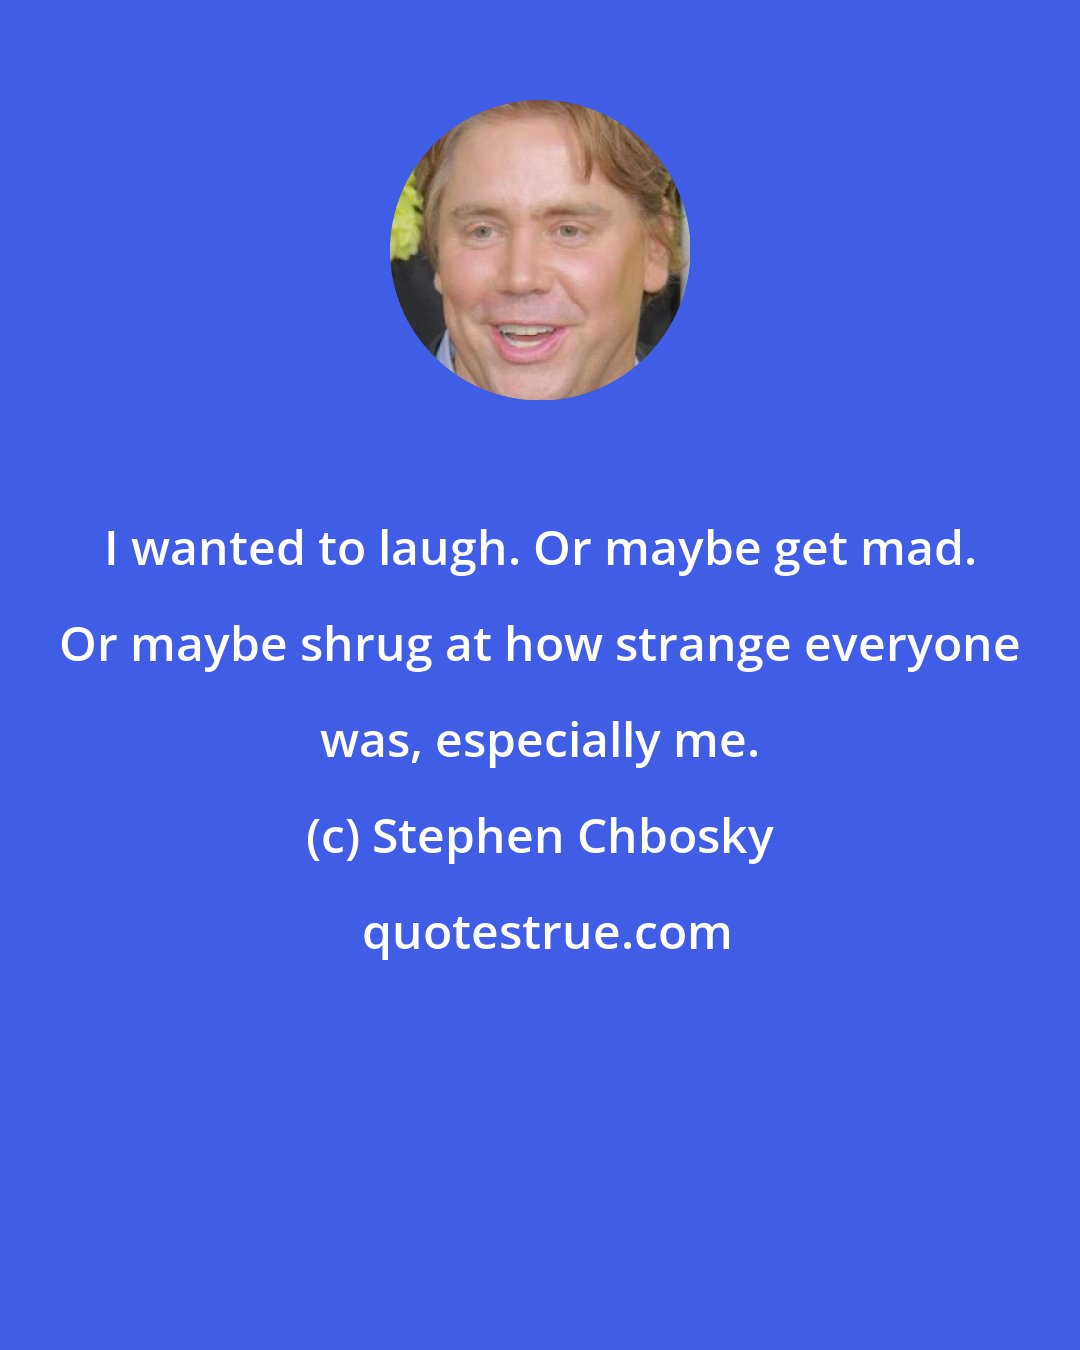 Stephen Chbosky: I wanted to laugh. Or maybe get mad. Or maybe shrug at how strange everyone was, especially me.